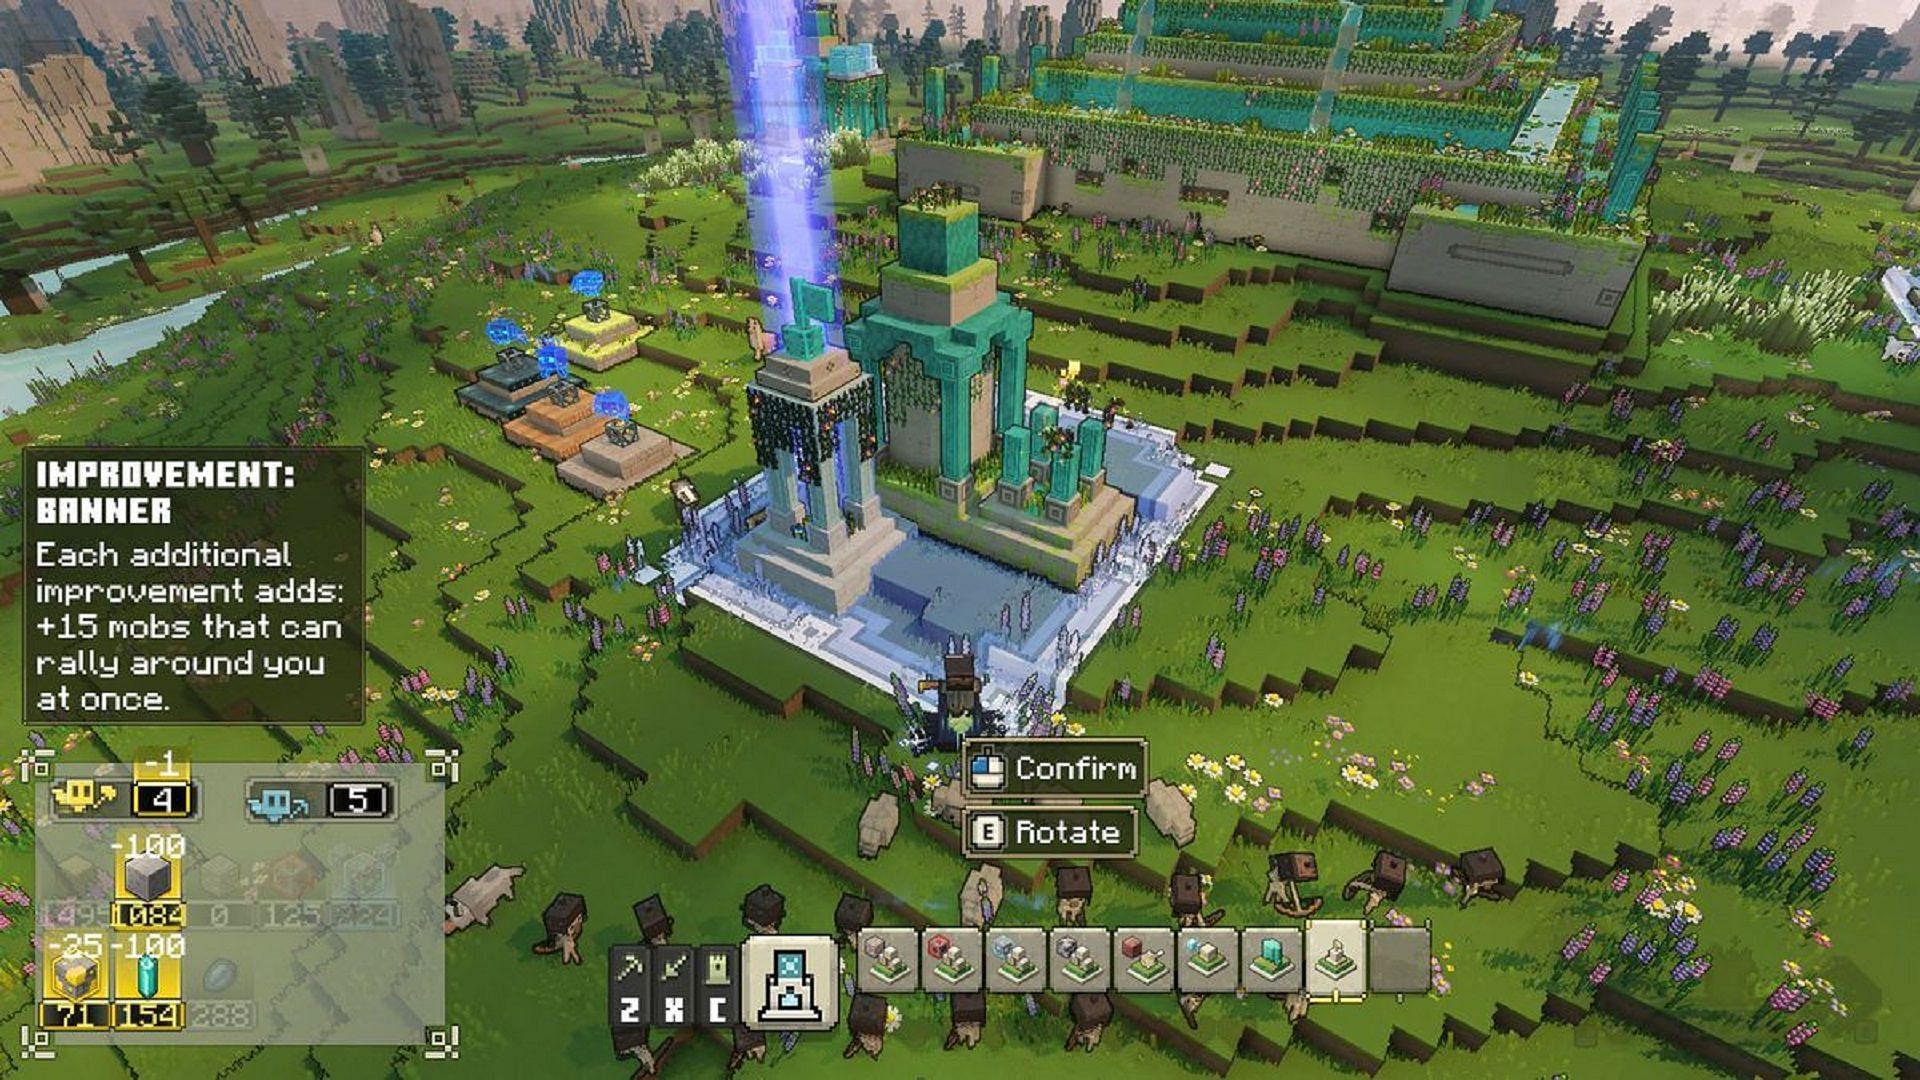 Some improvements in Minecraft Legends are far superior to others (Image via Mojang)